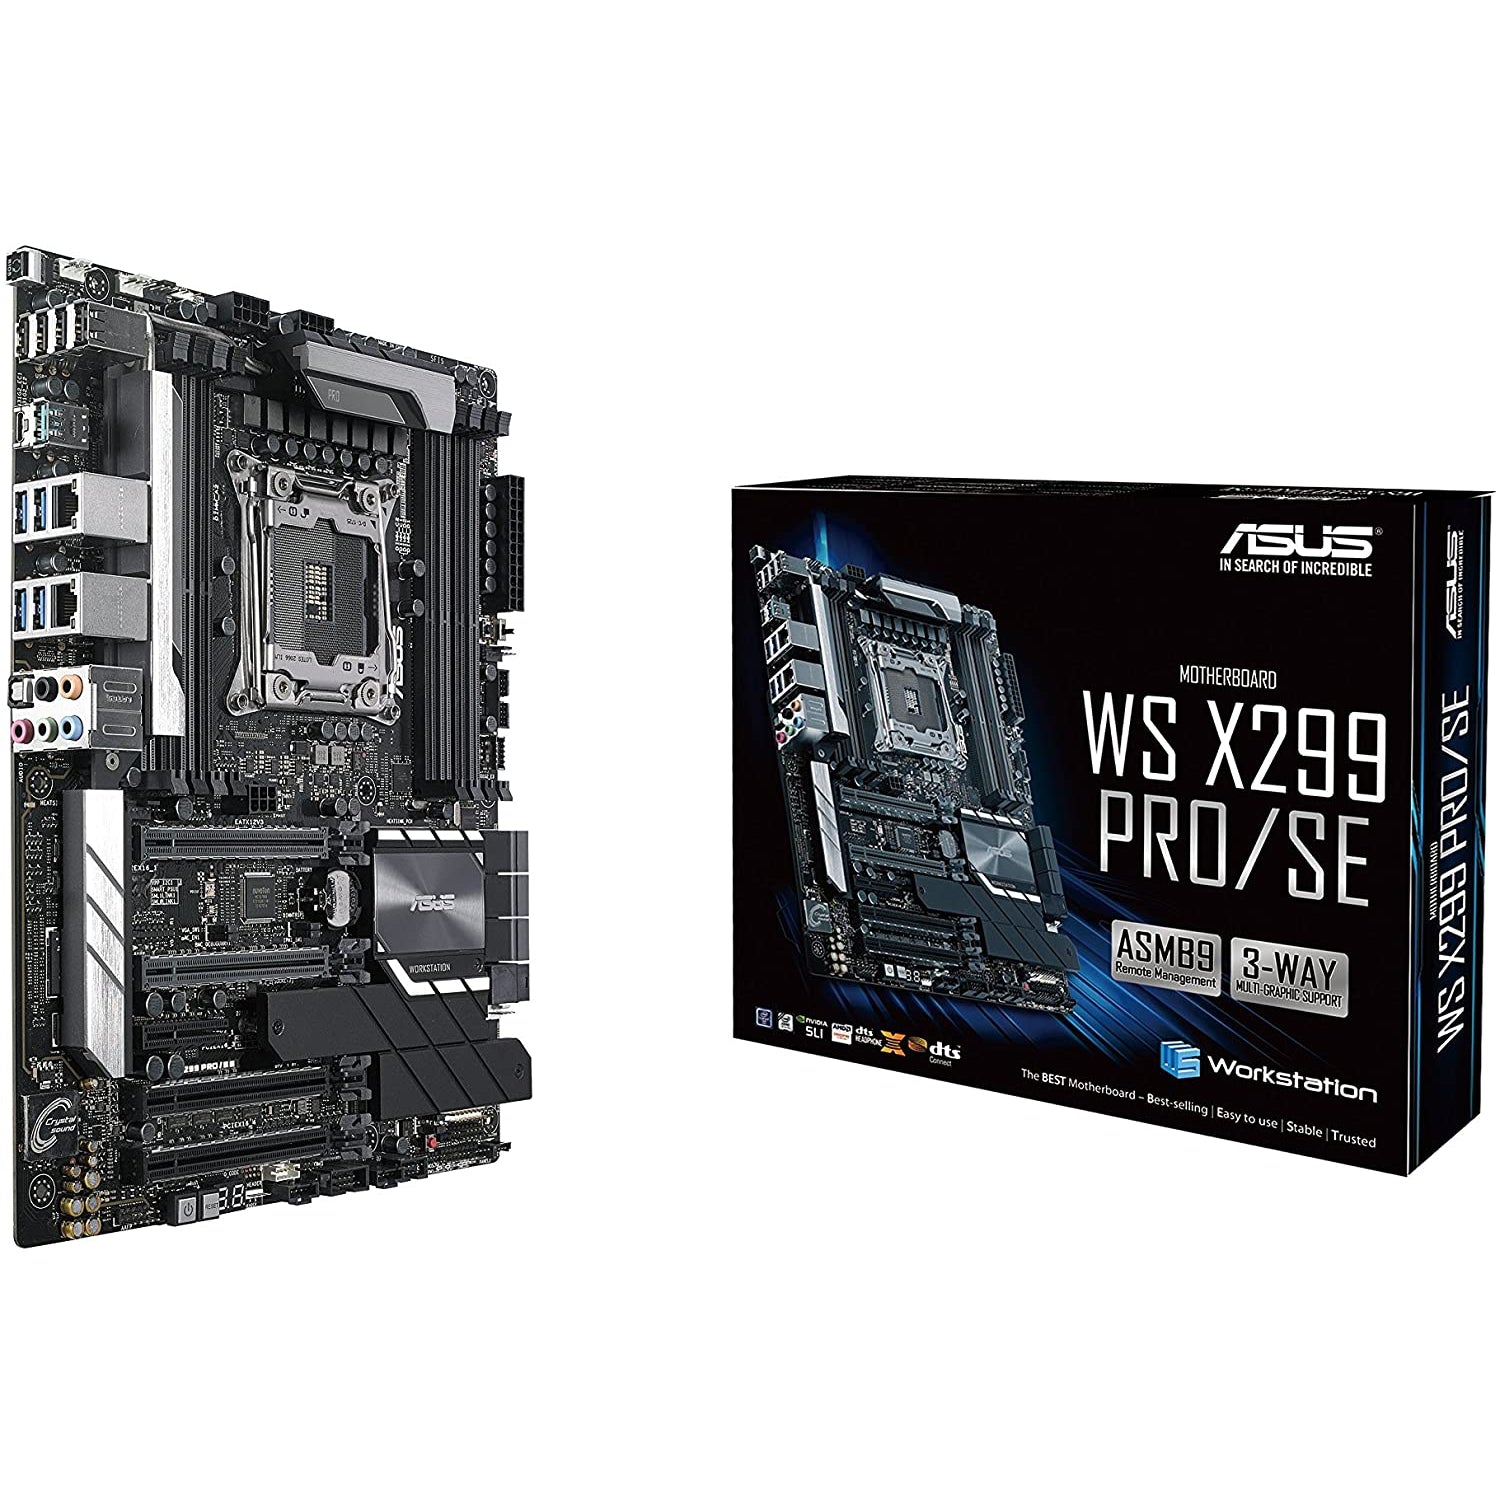 ASUS WS X299 PRO/SE 2066 Intel X299 ATX Workstation Motherboard 90SW00A0-M0EAY0